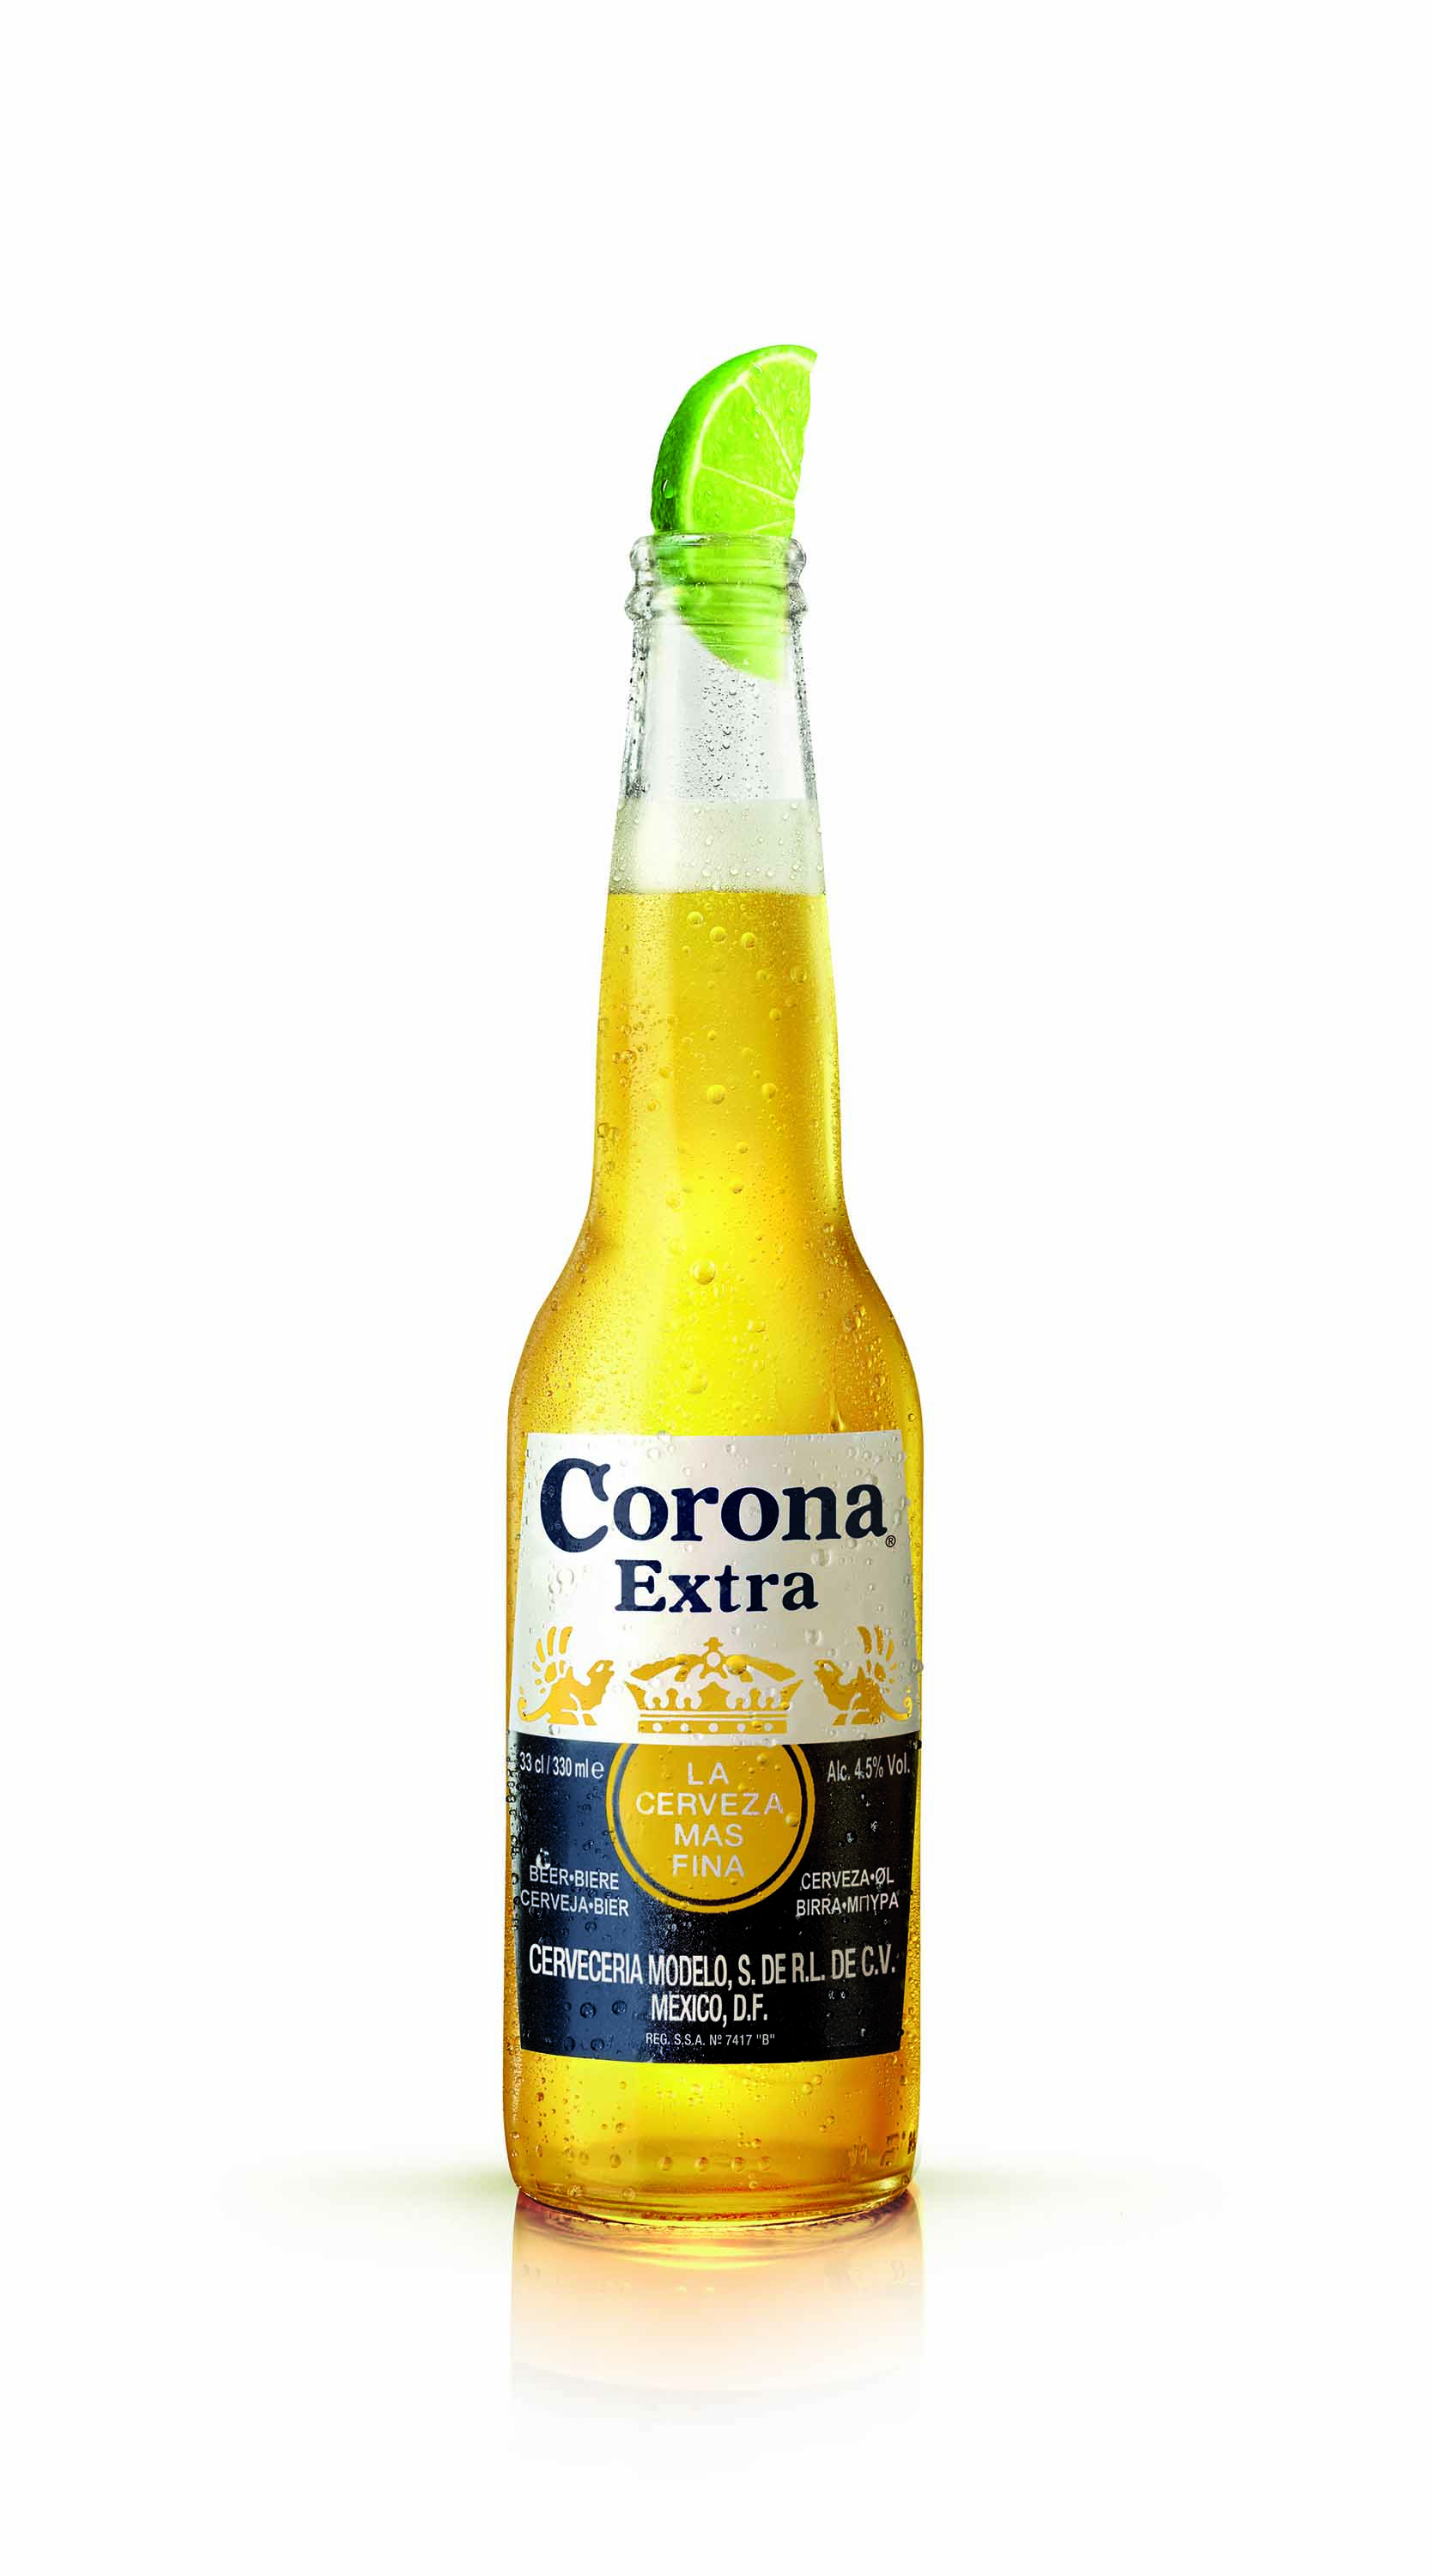 The brand value of Corona has risen by over 20% to $7 billion in 2021 according to the report.